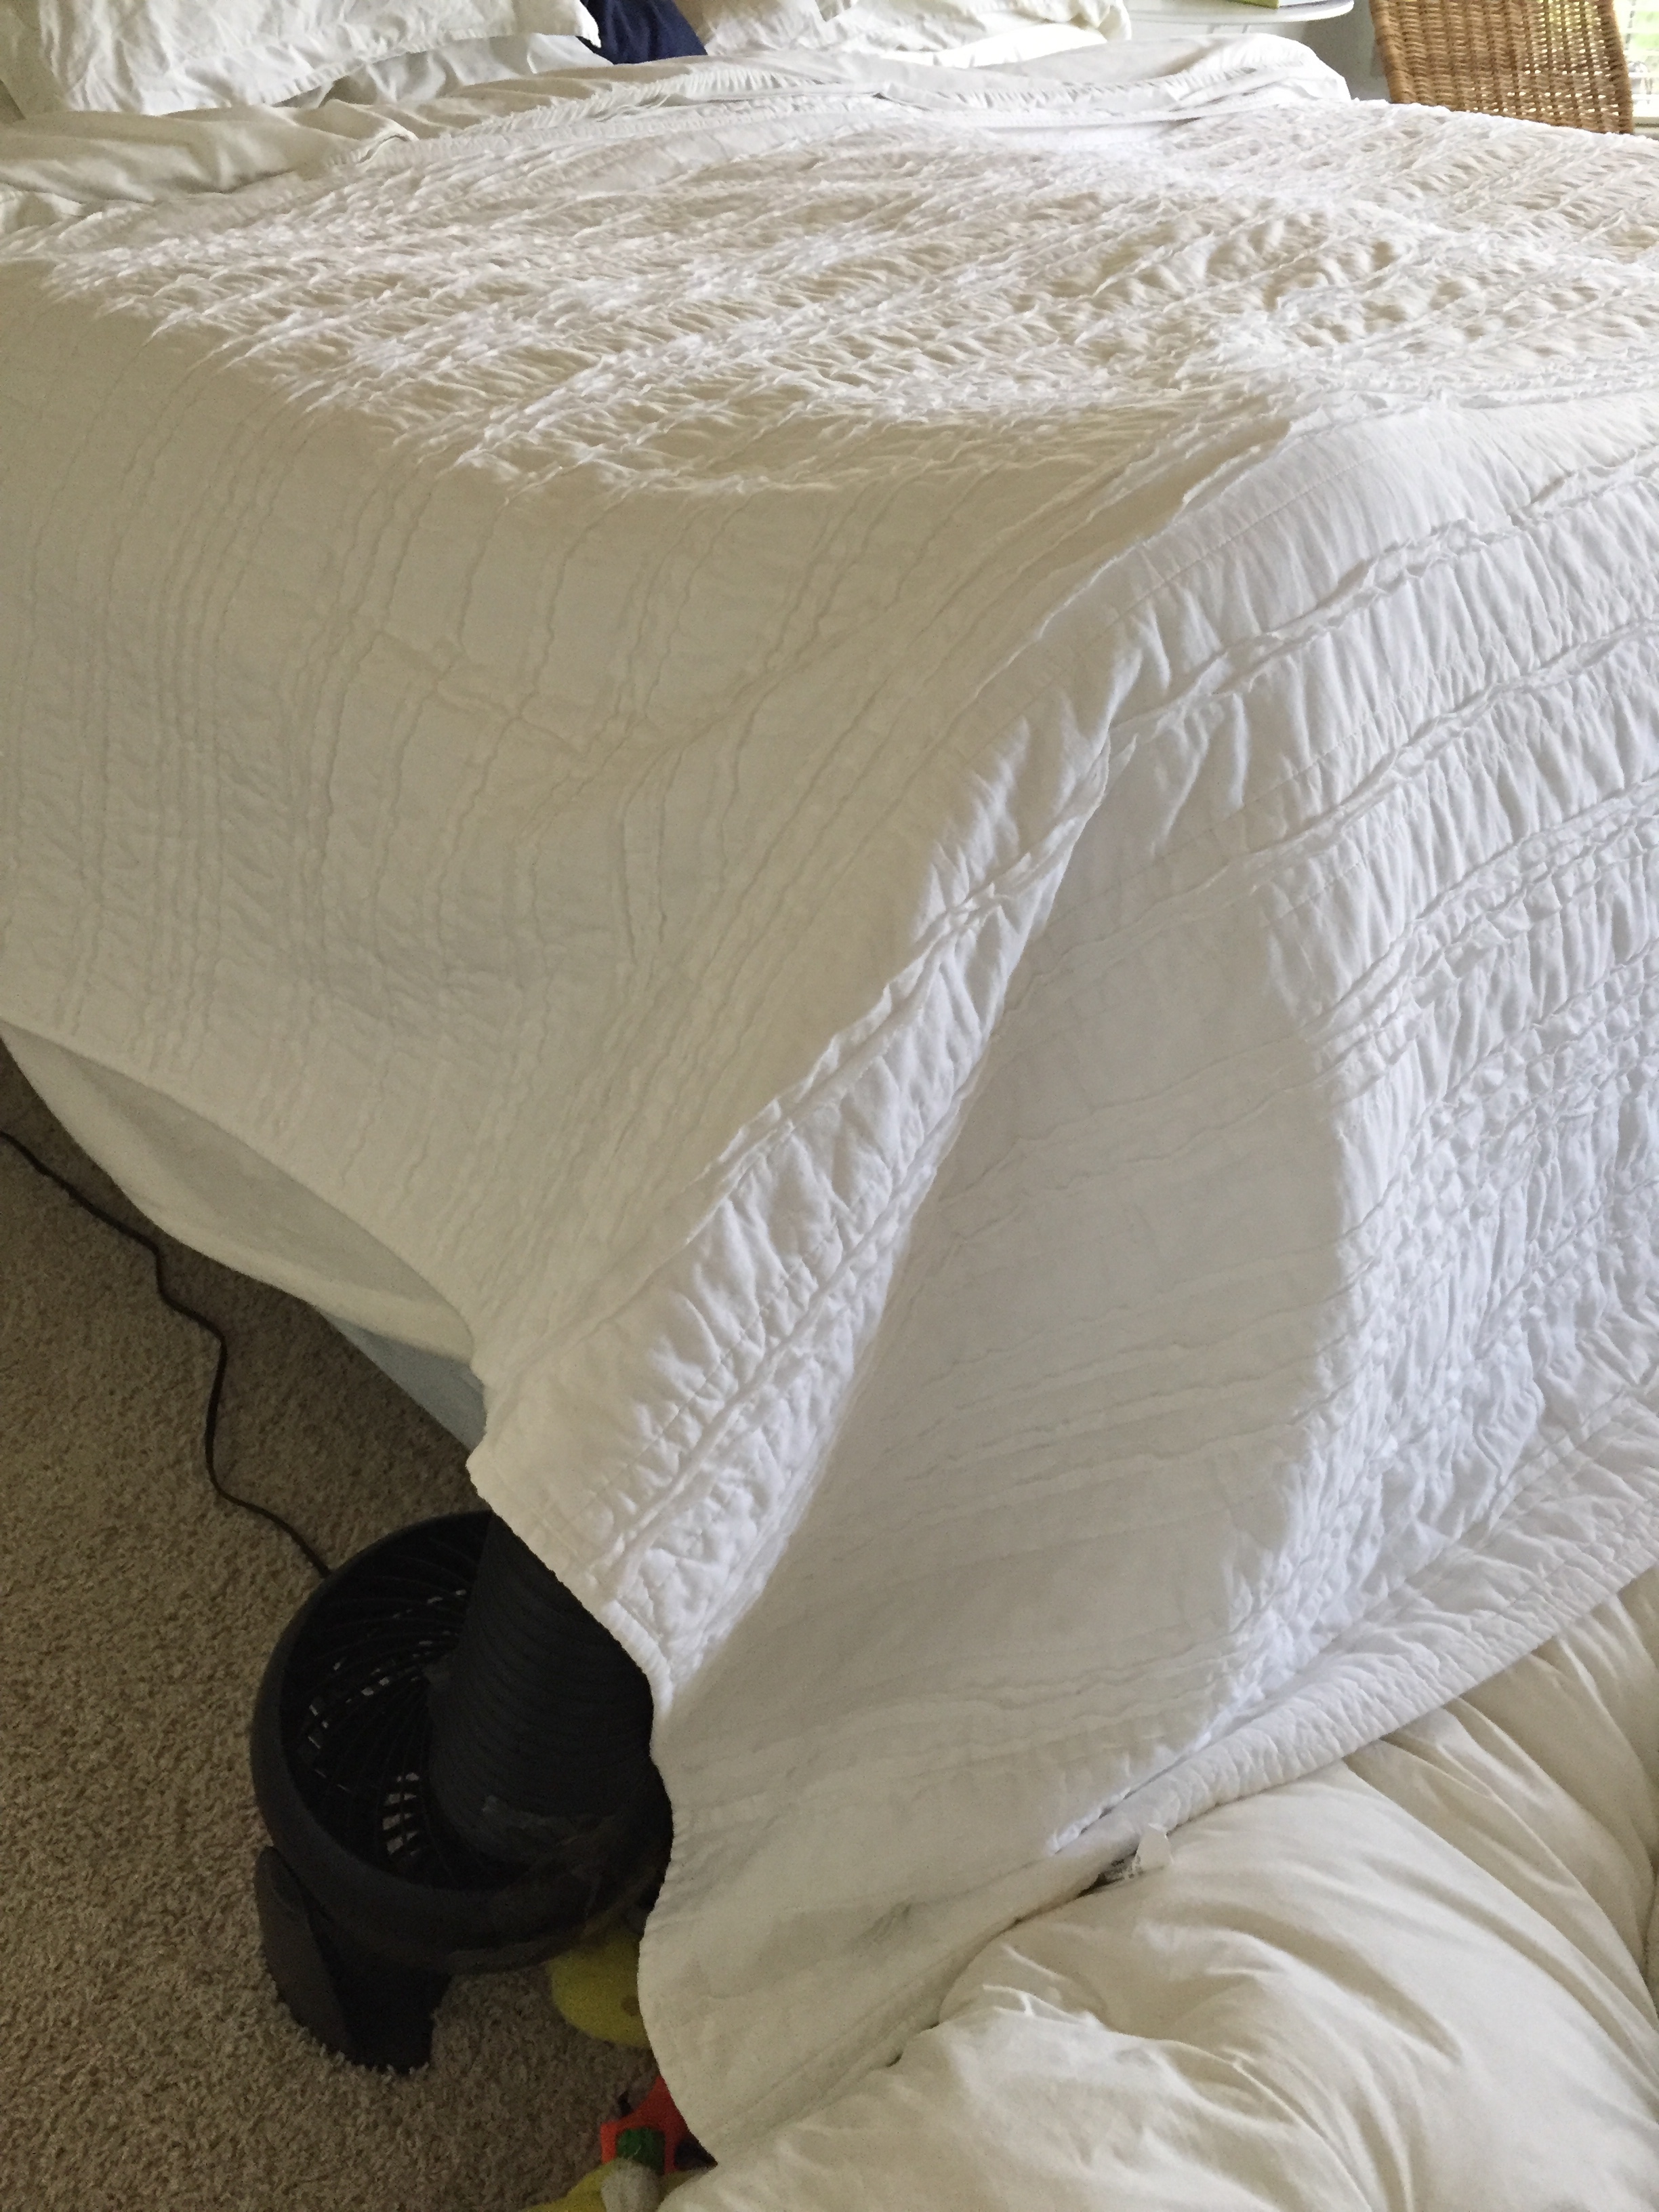 Diy Homemade Bed Cooling System